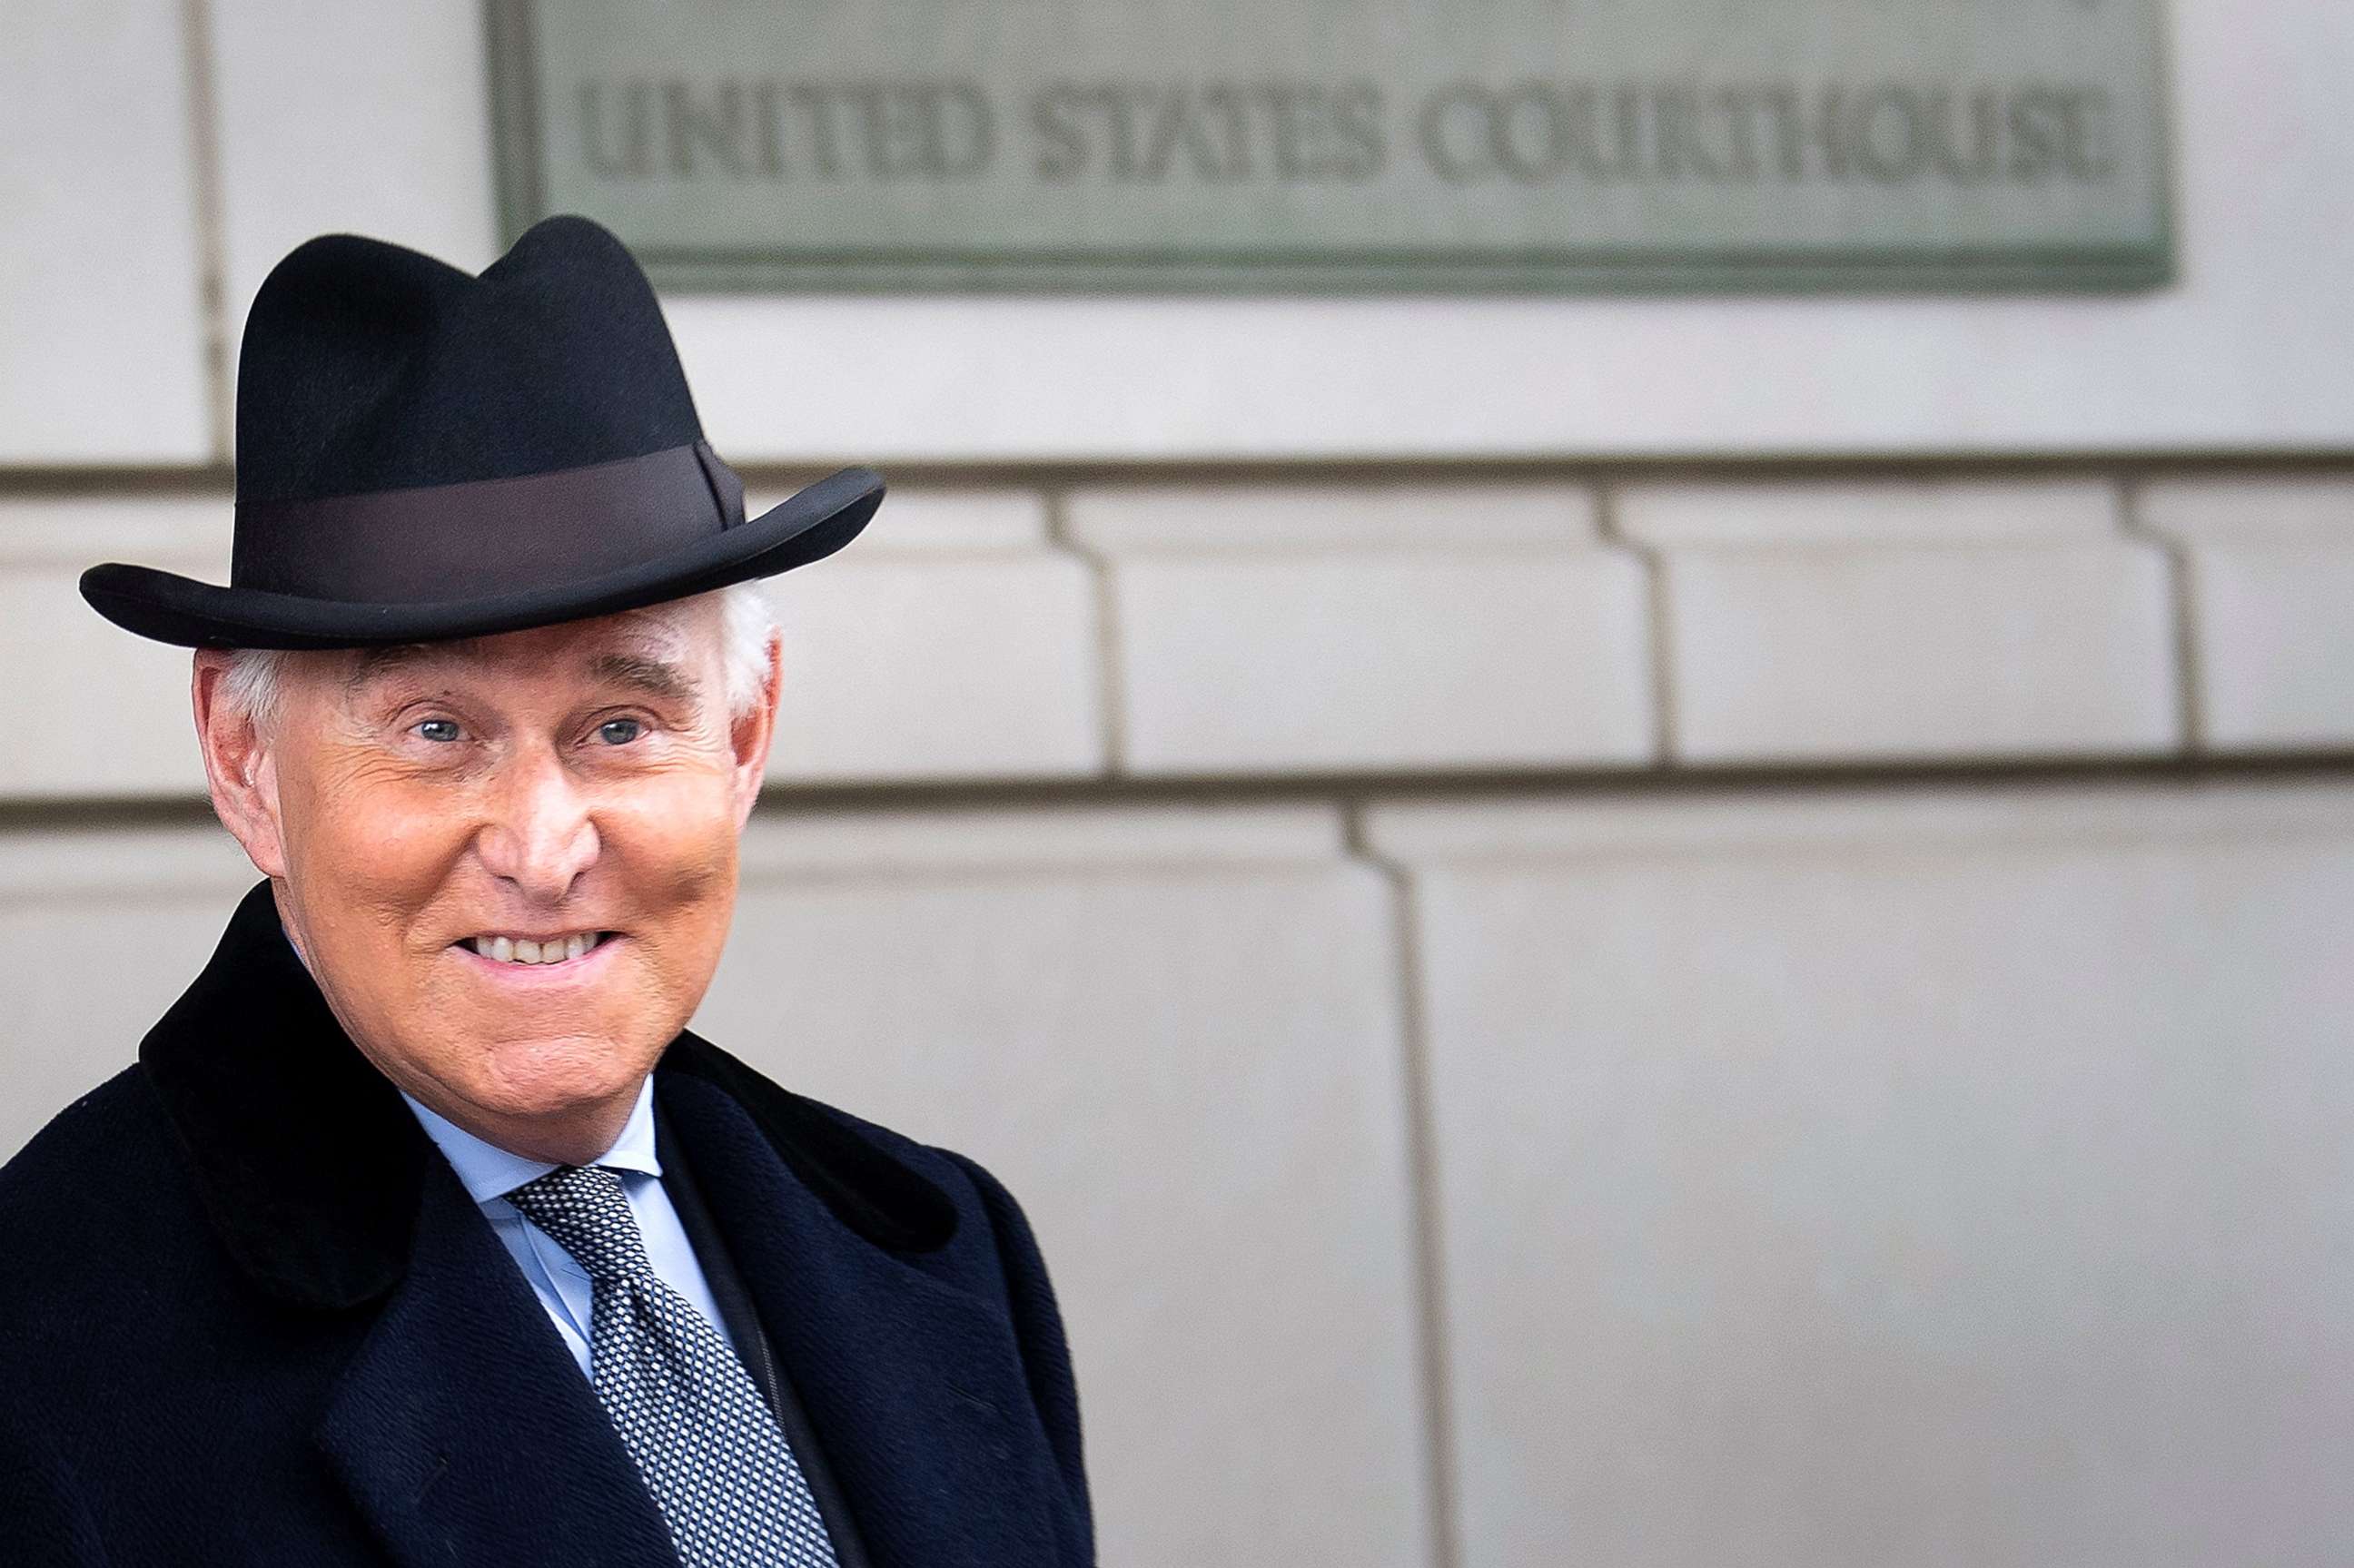 PHOTO: Roger Stone leaves Federal Court after a sentencing hearing, Feb. 20, 2020, in Washington, DC.